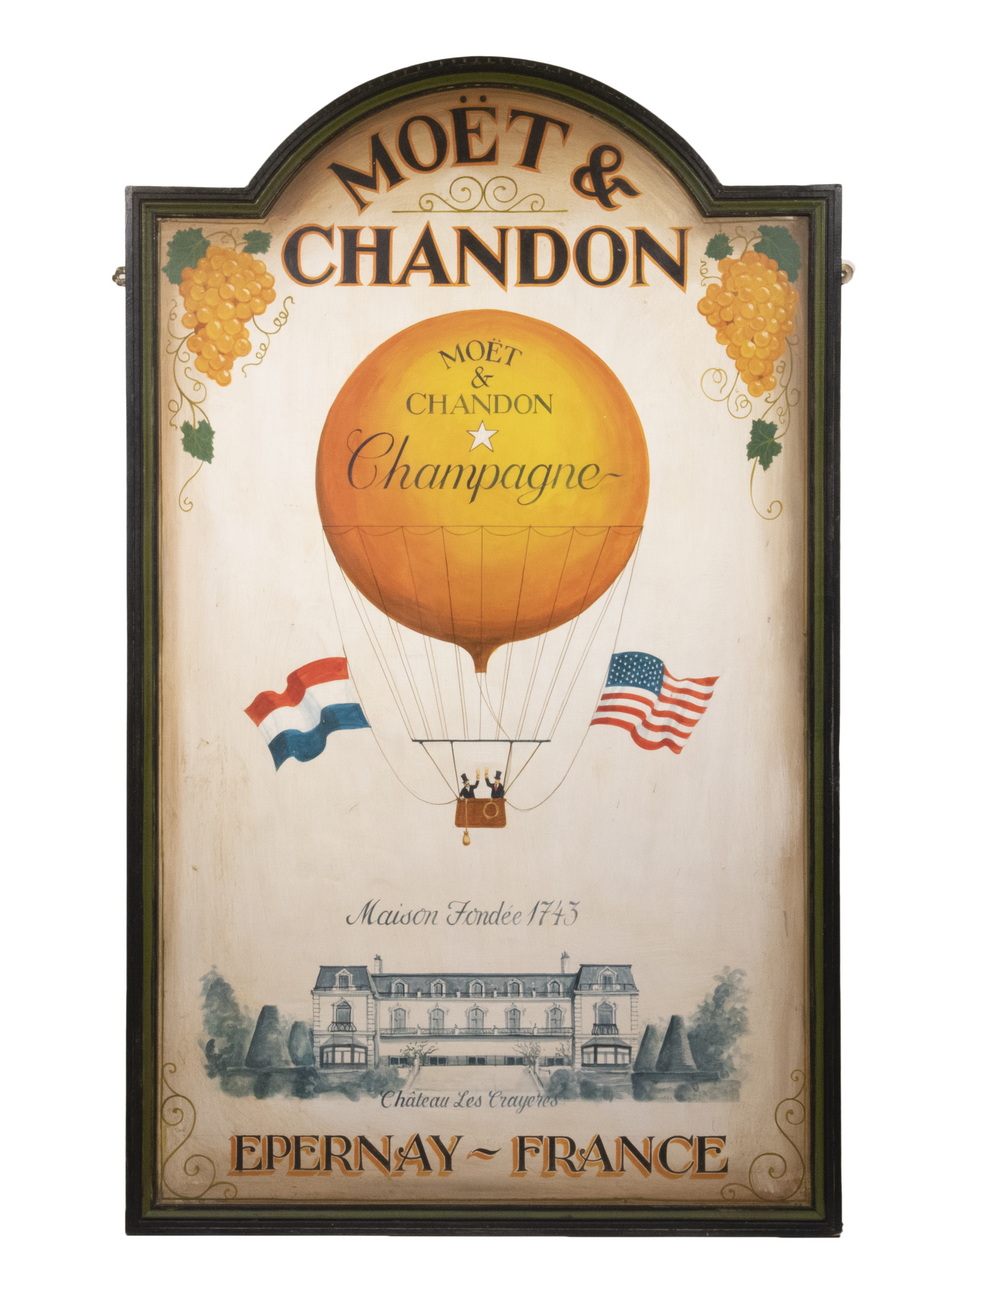 LARGE MOET & CHANDON SIGN WITH BALLOON,